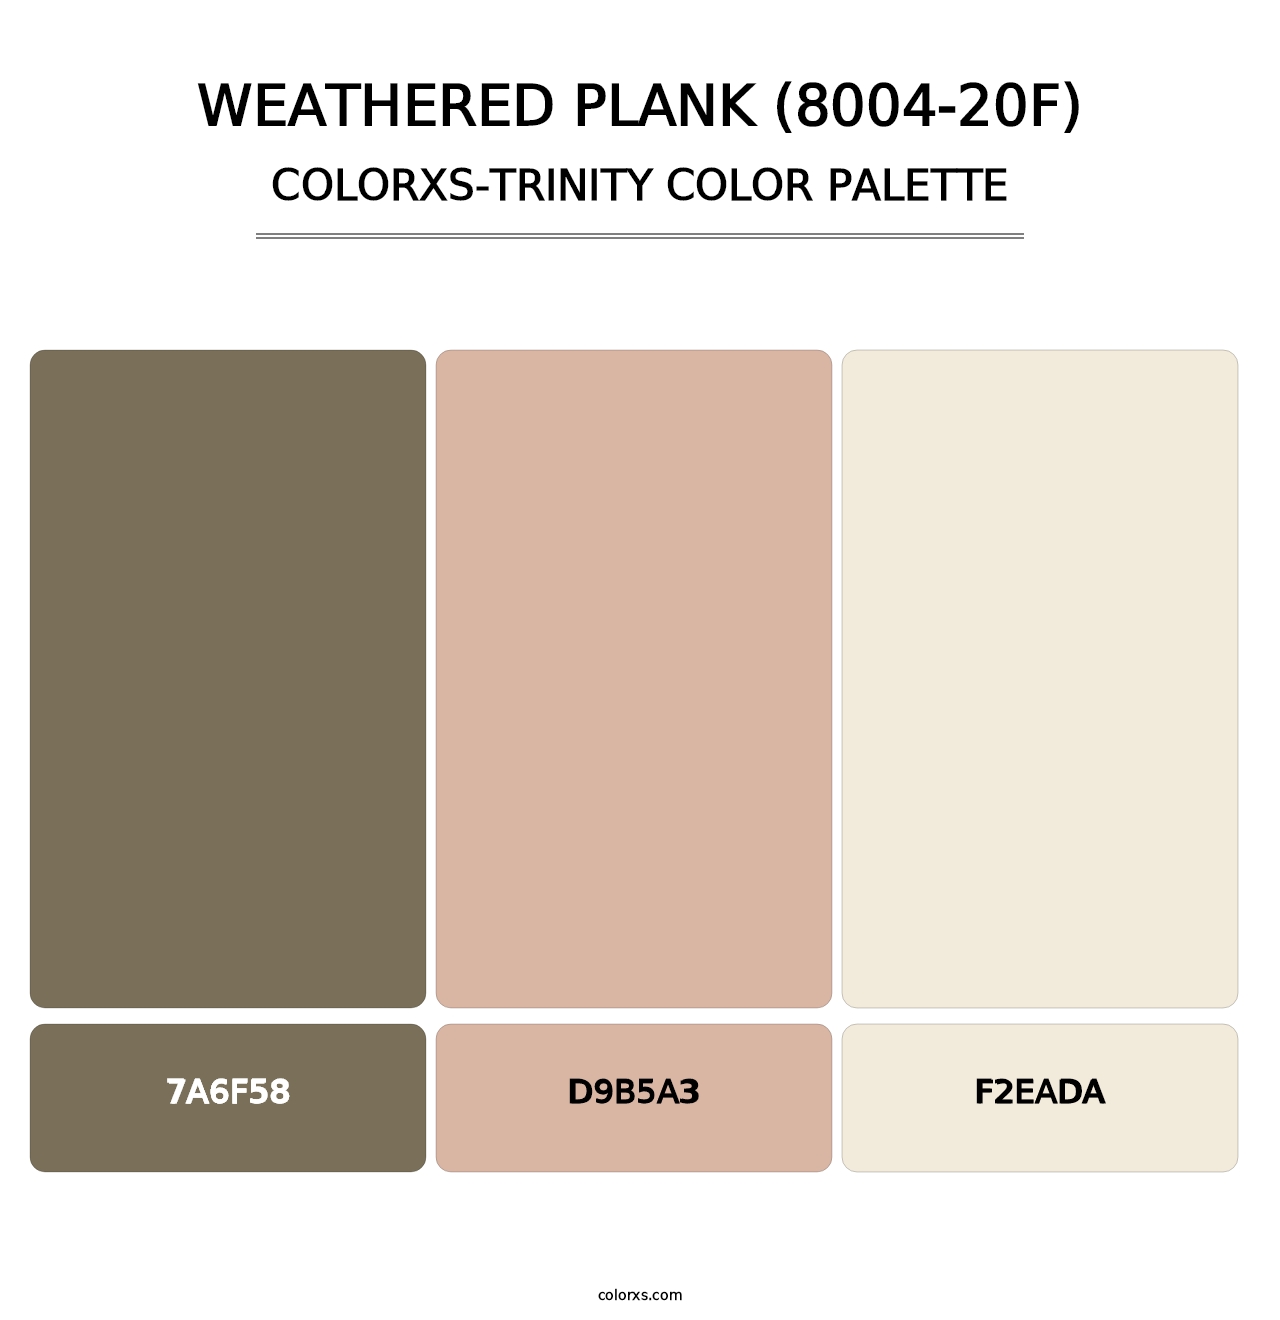 Weathered Plank (8004-20F) - Colorxs Trinity Palette